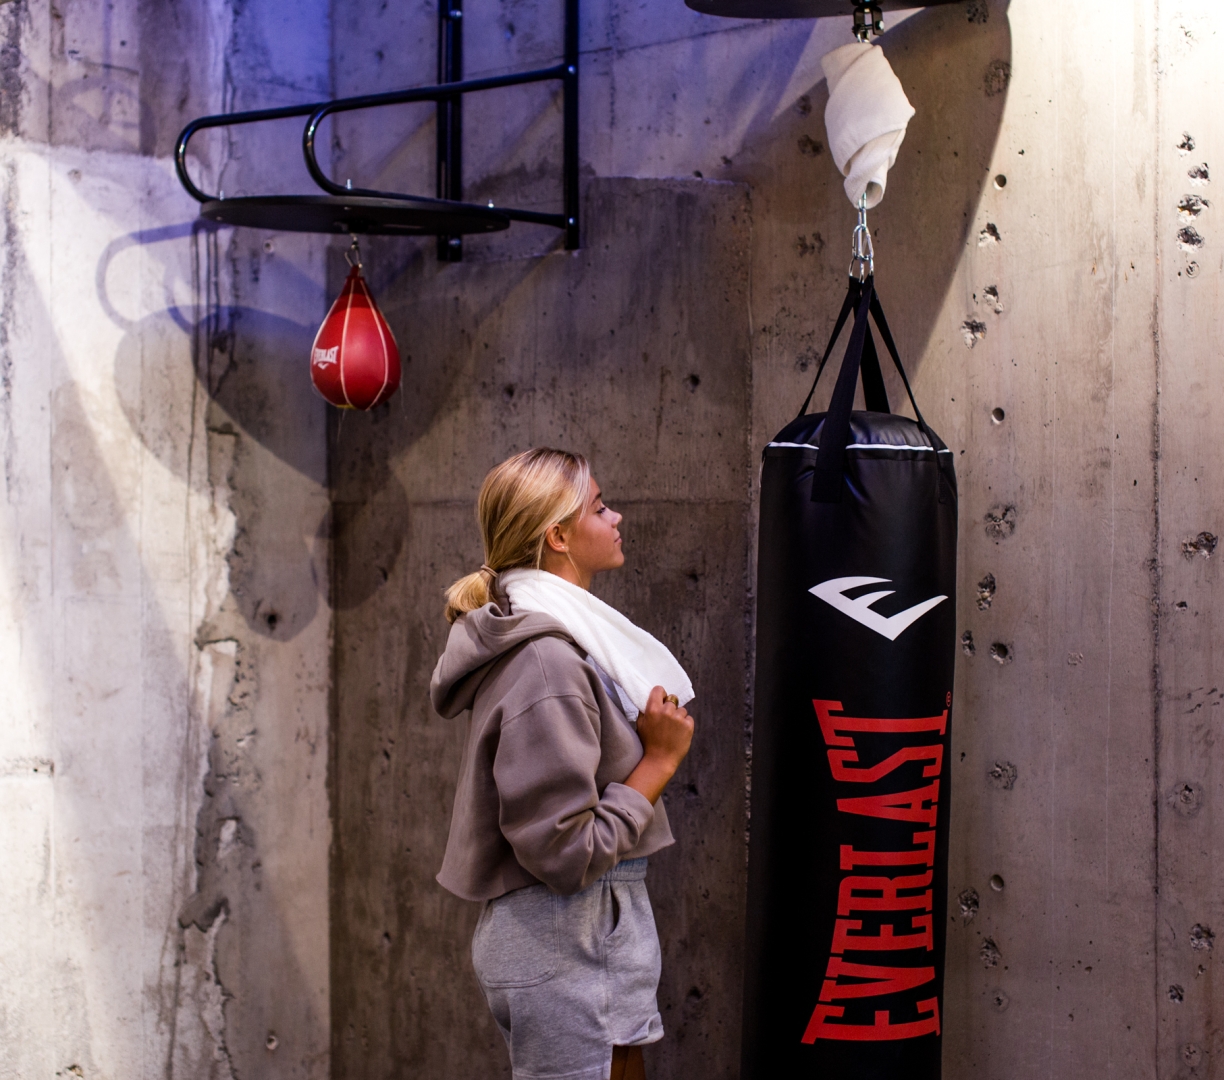 A woman at a punching bag in the gym at the Heathman Hotel in Portland, Oregon.